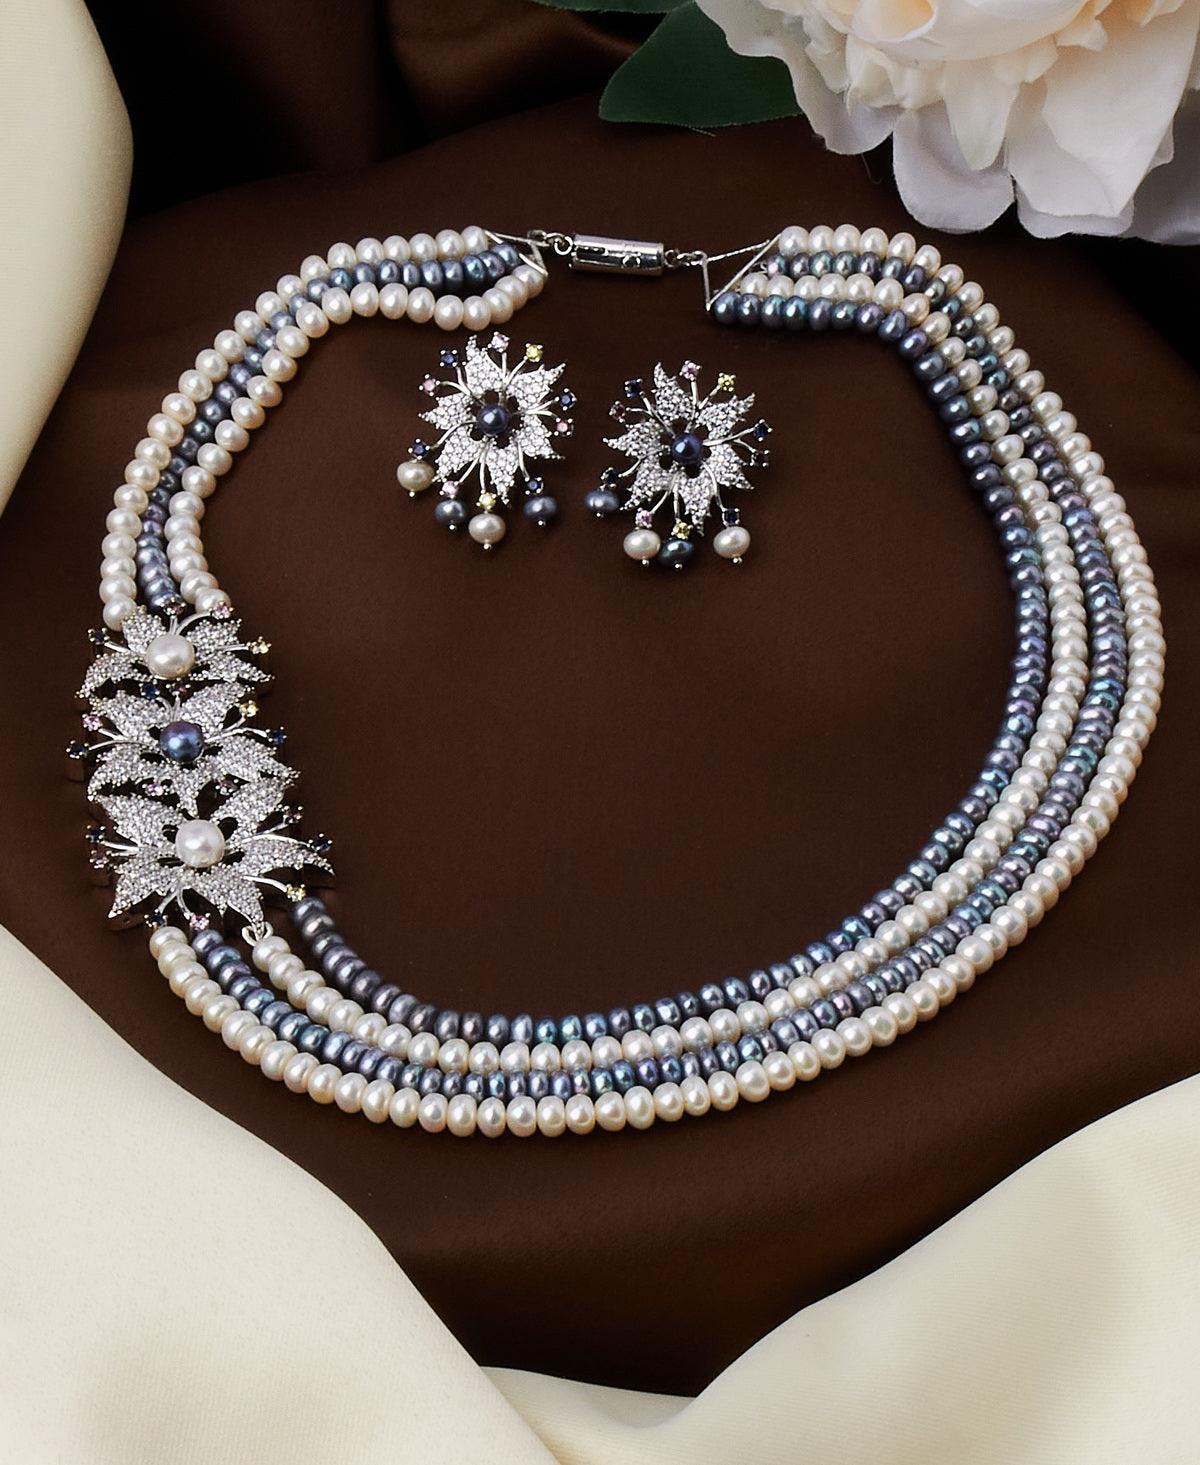 Triple Florial Gorgeous White/Black Pearl Necklace Set - Chandrani Pearls